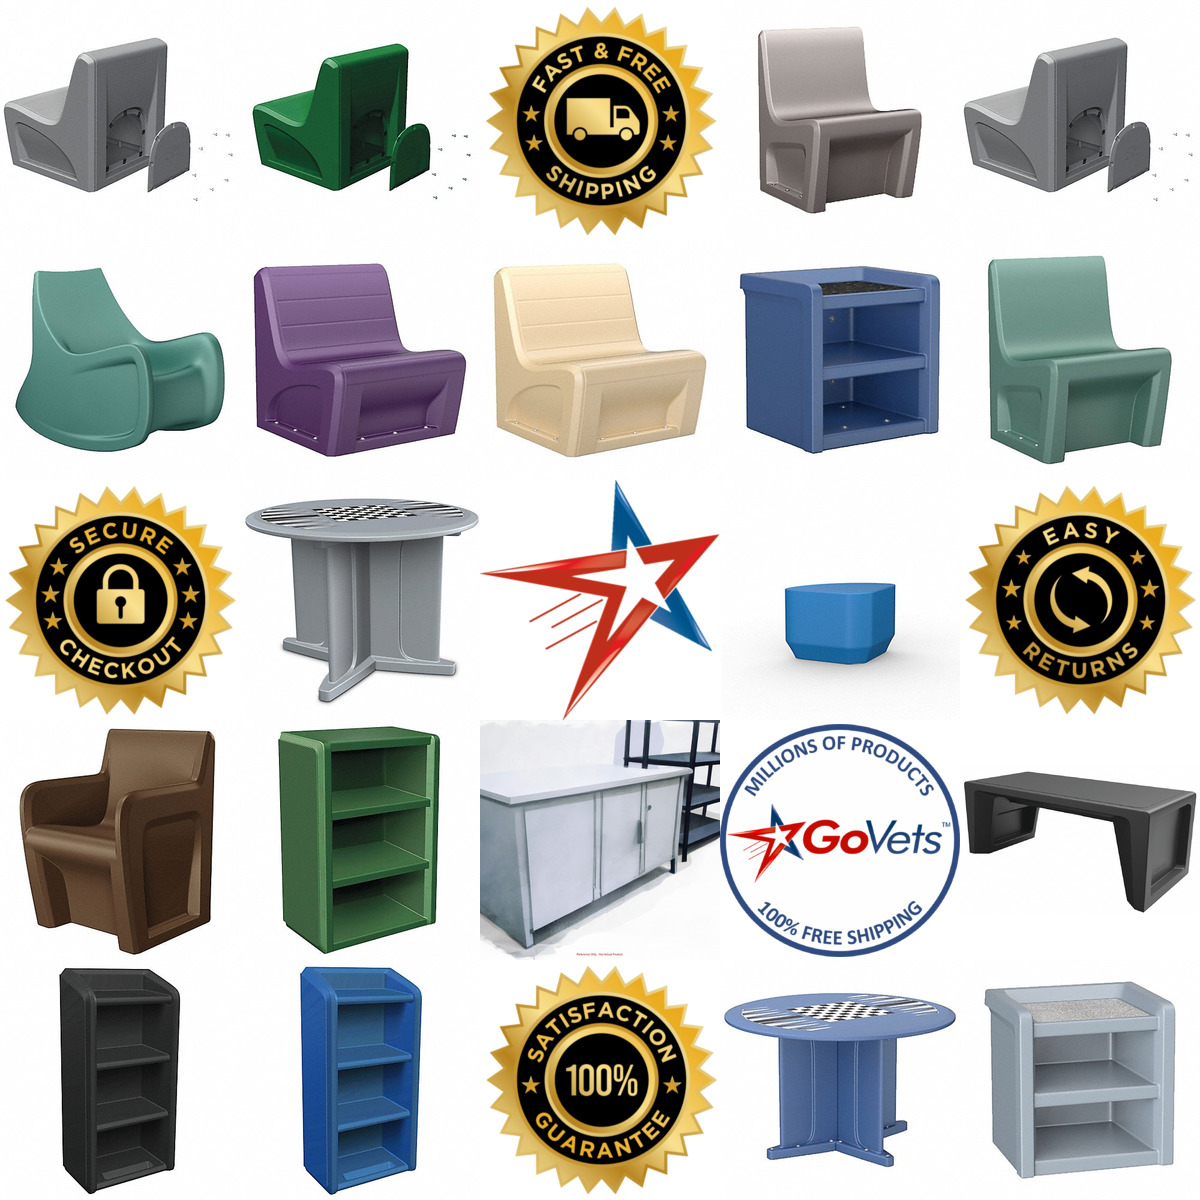 A selection of Correctional Facility Furniture products on GoVets